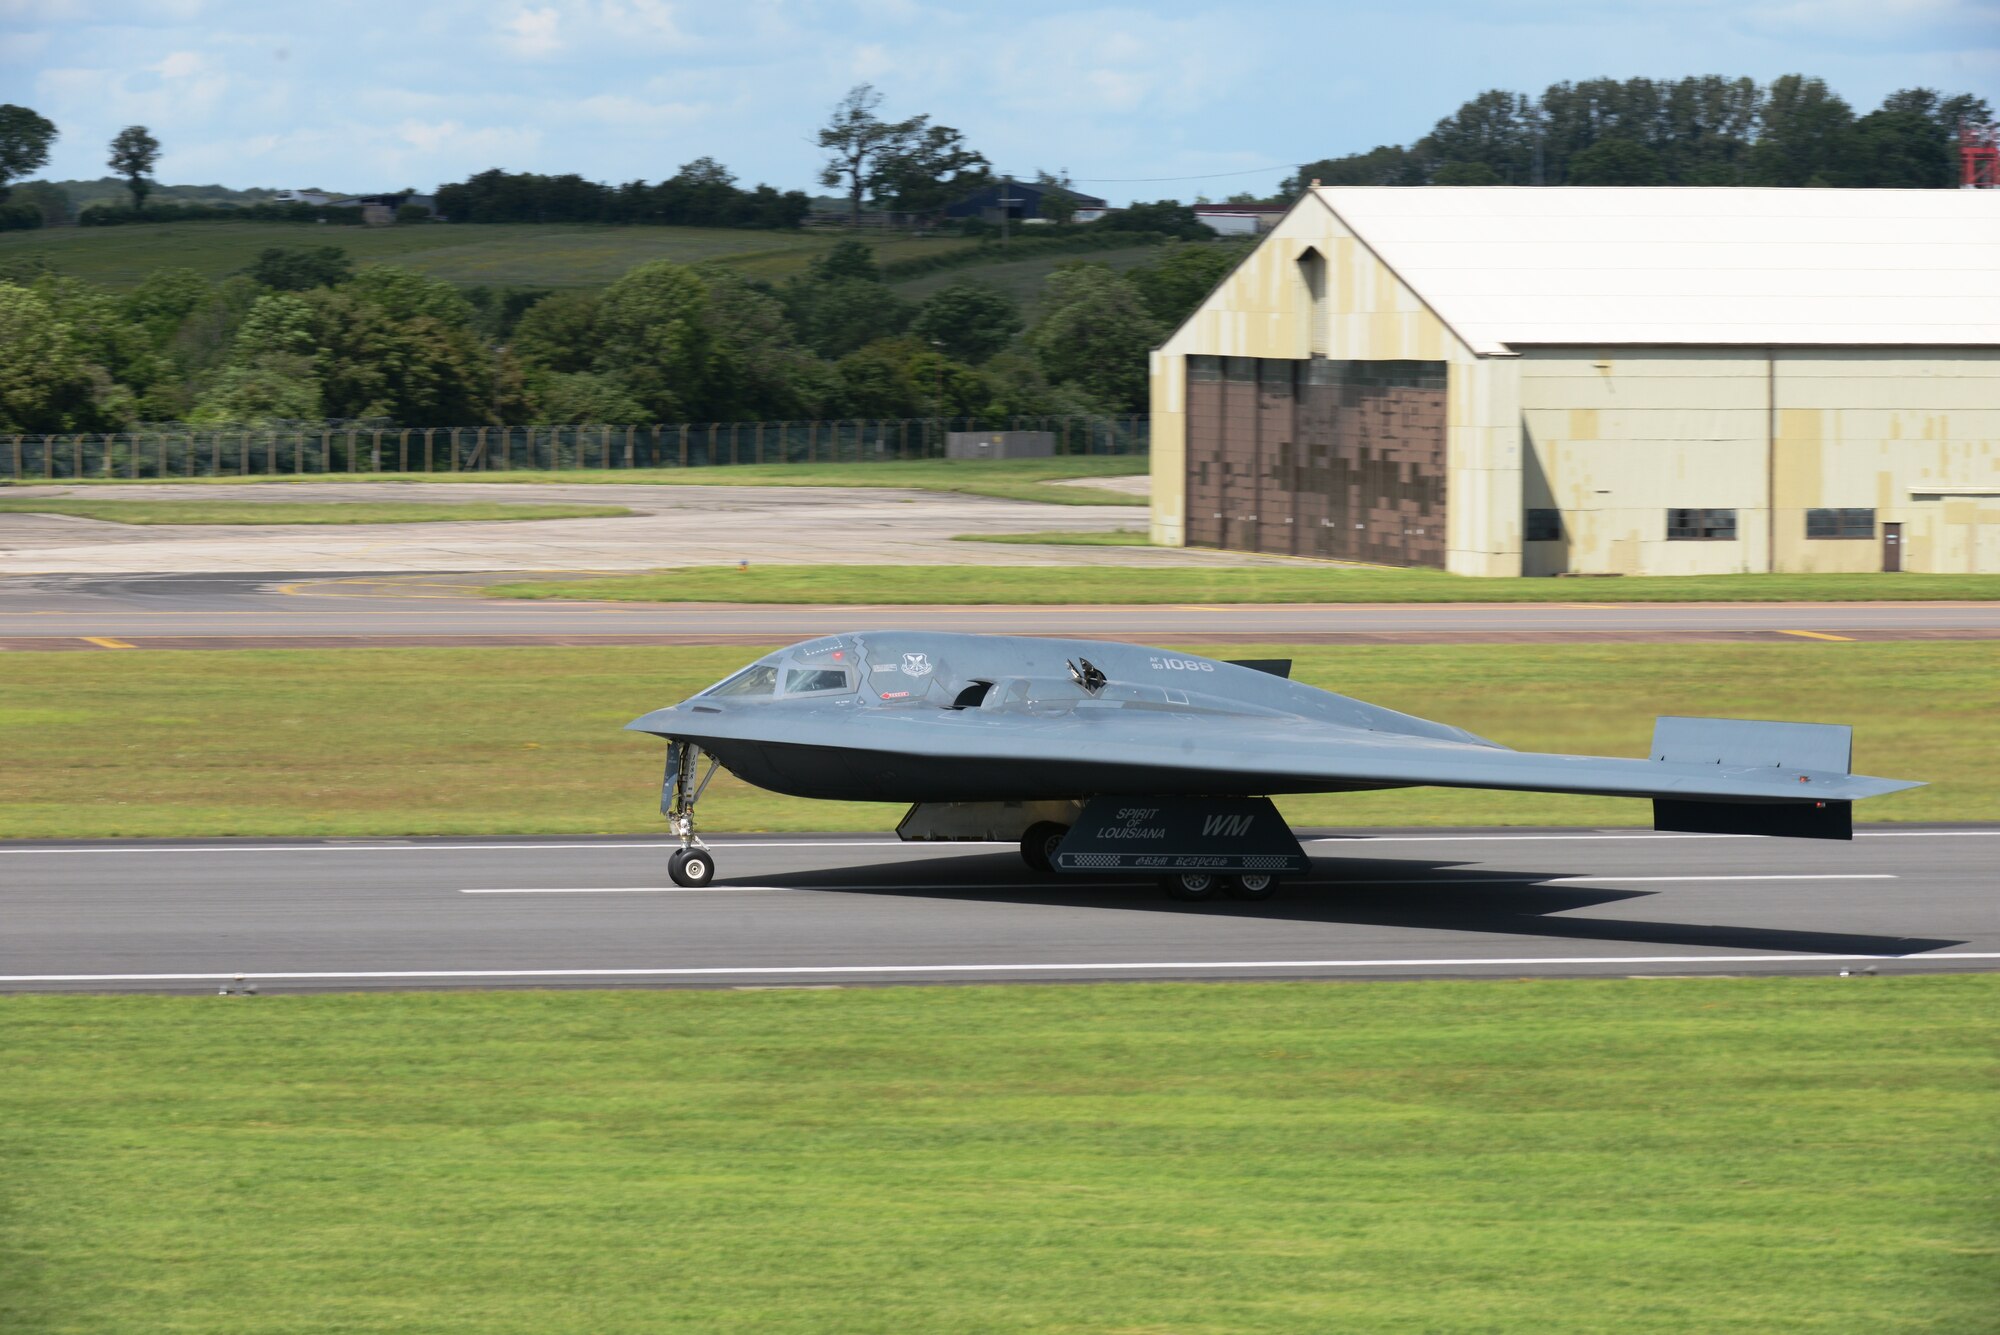 A B-2 Spirit from the 509th Bomb Wing, Whiteman Air Force Base, Mo., lands on the runway at RAF Fairford, England, June 8, 2014. The B-2’s low-observability provides it greater freedom of action at high altitudes, thus increasing its range and a better field of view for the aircraft's sensors. Its unrefueled range is approximately 6,000 nautical miles. (U.S. Air Force photo by Tech. Sgt. Chrissy Best/Released)